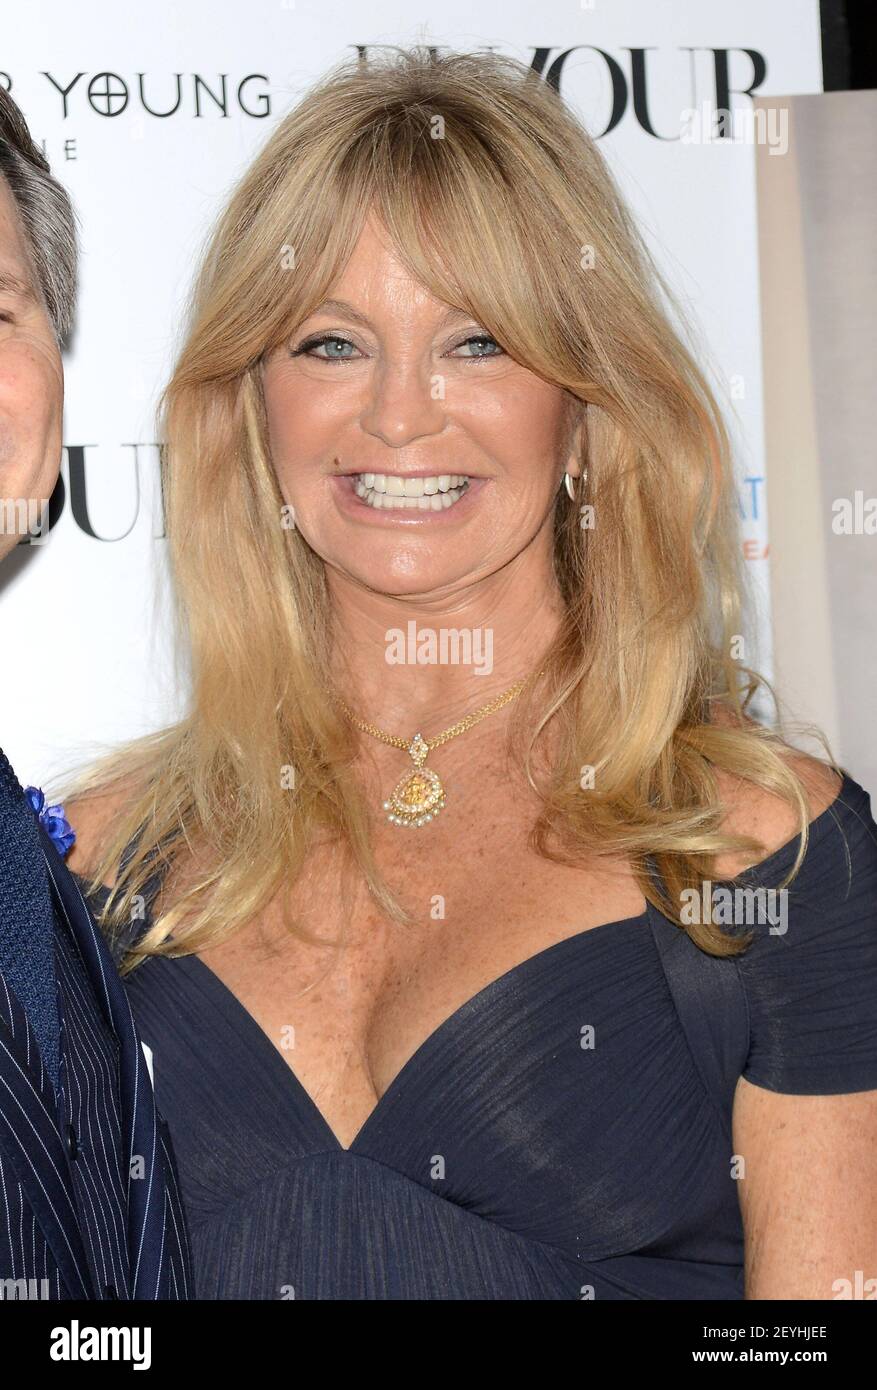 Actress Goldie Hawn attends the celebration event for her Goldie Hawn ...